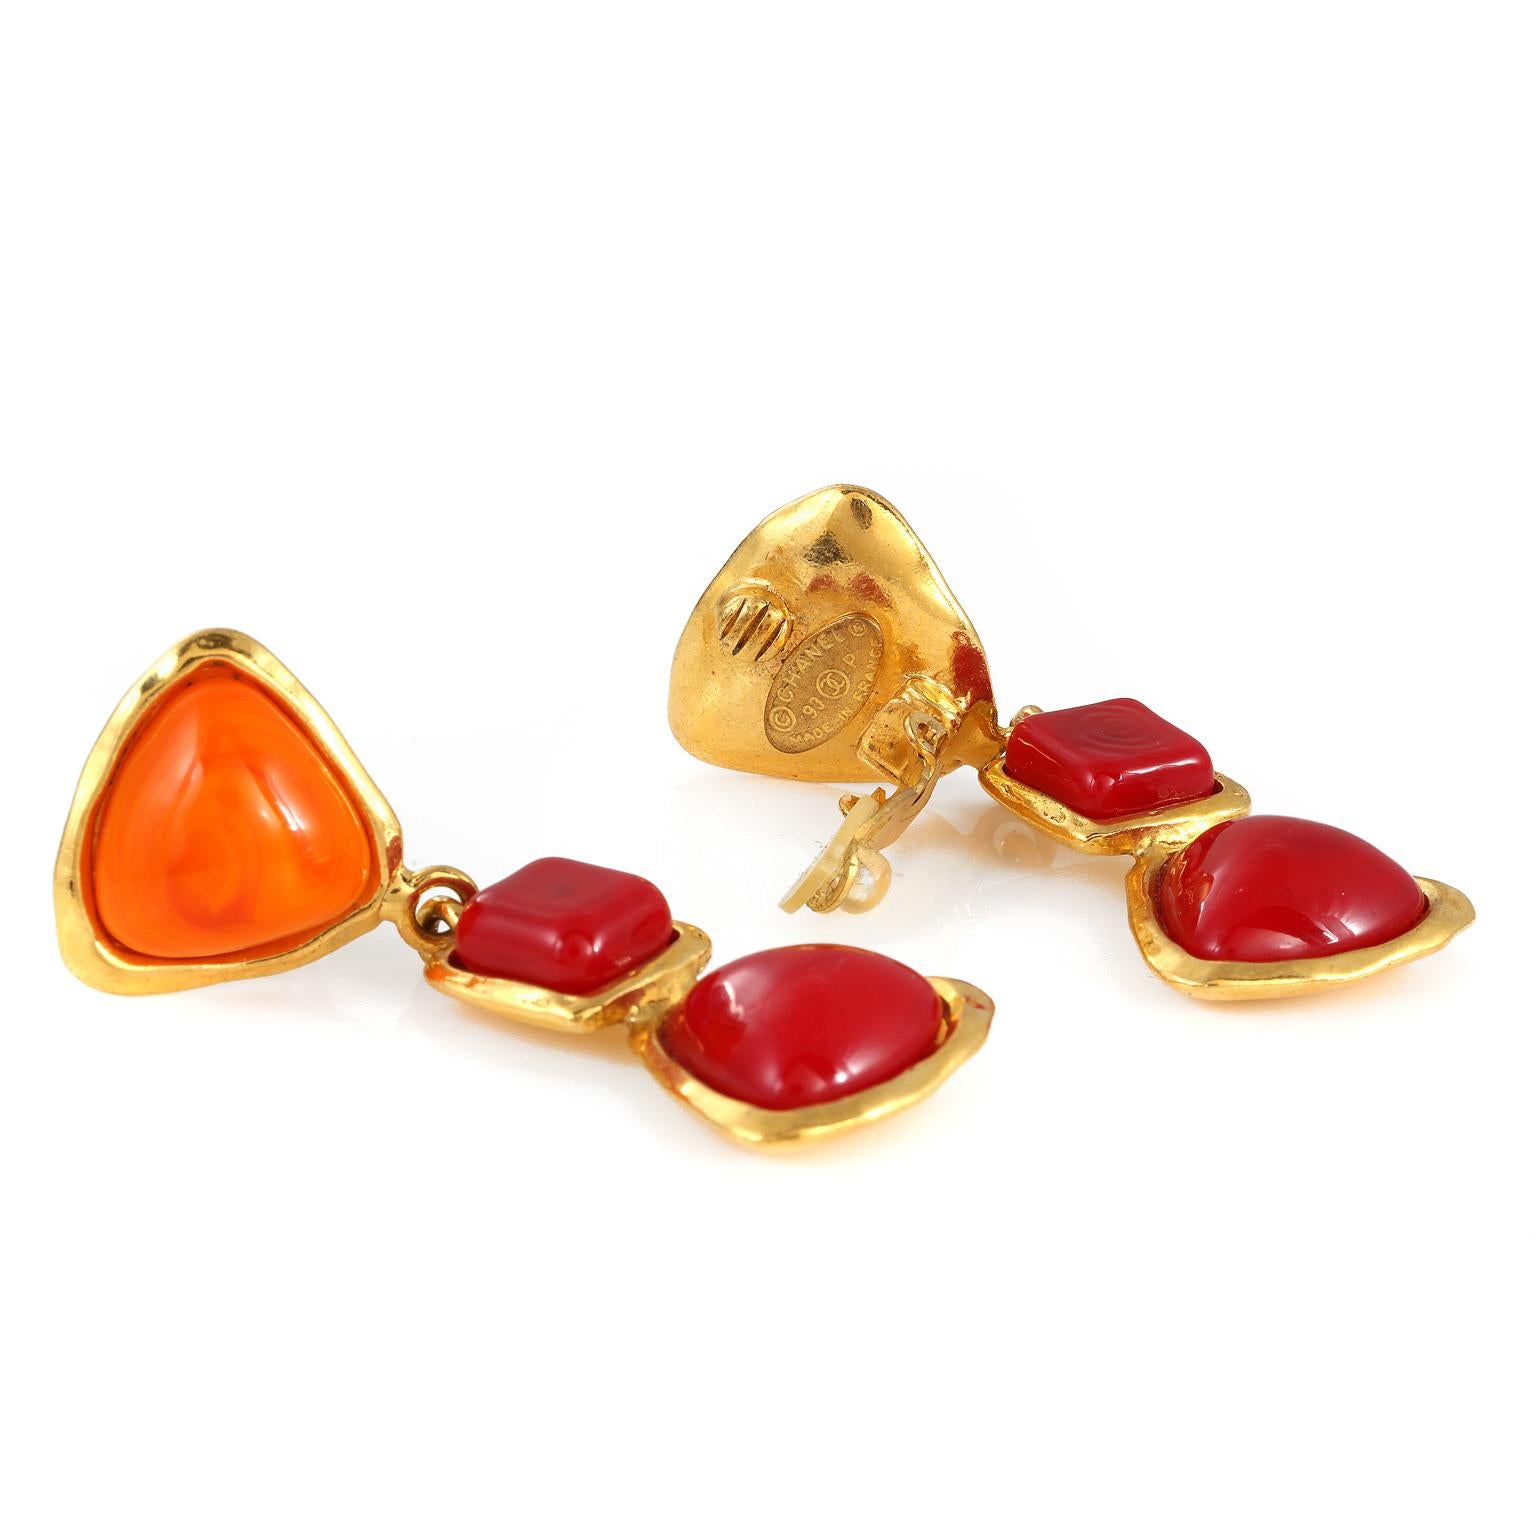 These authentic Chanel Orange and Red Gripoix Dangle Earrings are in exceptionally good vintage condition from the Spring 1993 collection.  Opaque orange and red Gripoix glass stones are set in gold tone metal.  Two red stones dangle from an orange